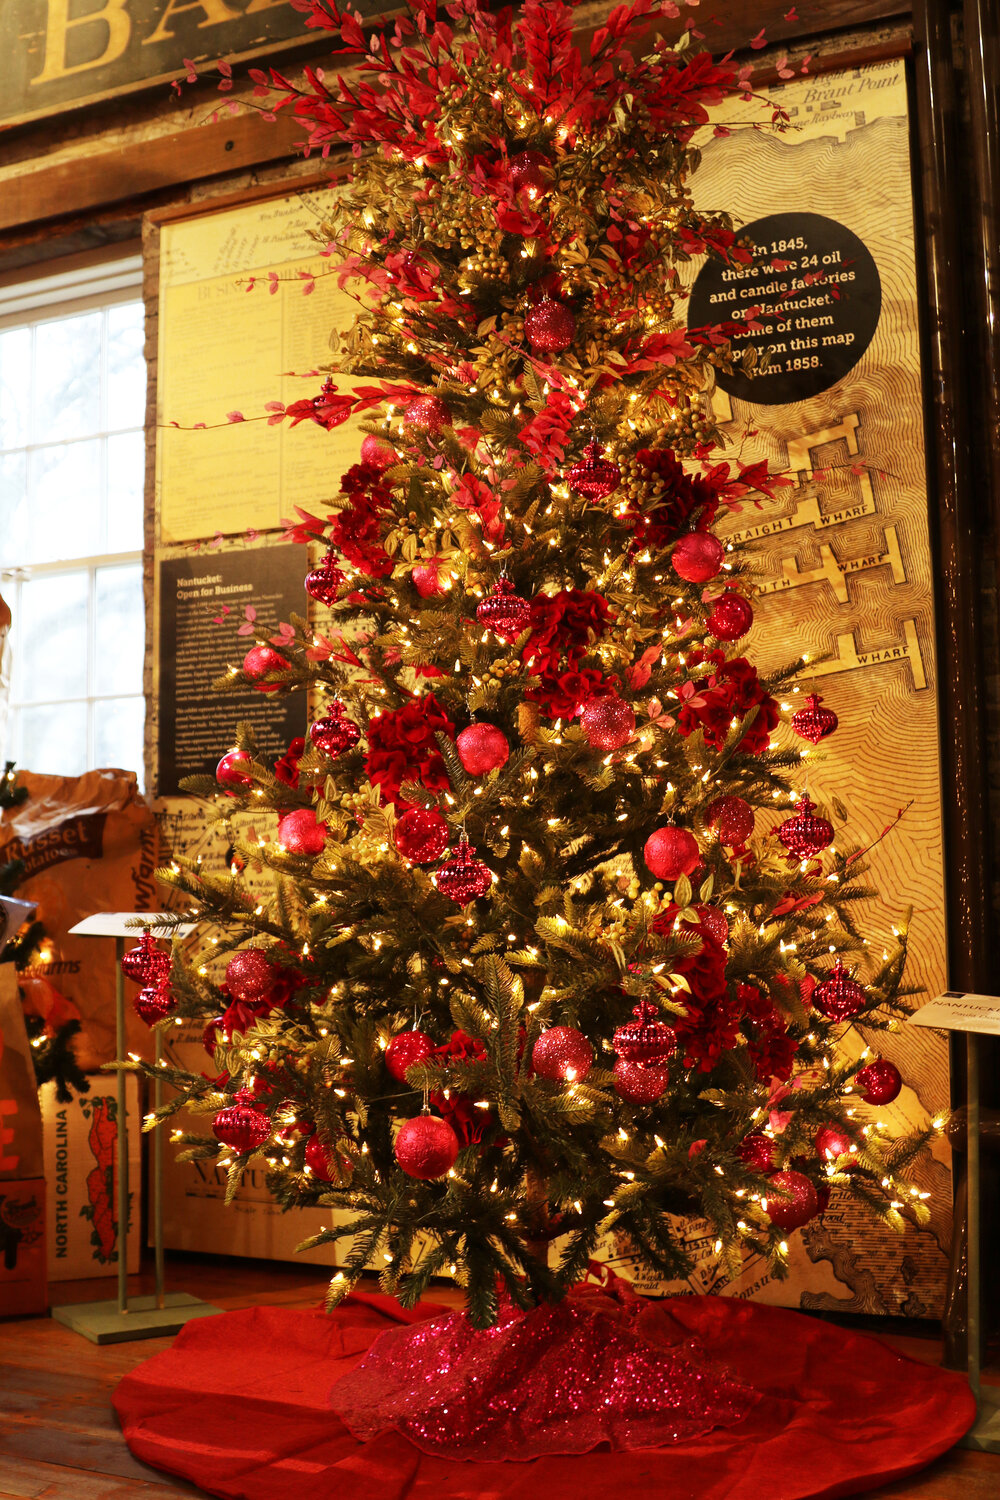 The Nantucket Historical Association’s annual Festival of Trees includes more than 75 trees decorated by businesses, community groups and residents on display at the Broad Street Whaling Museum.